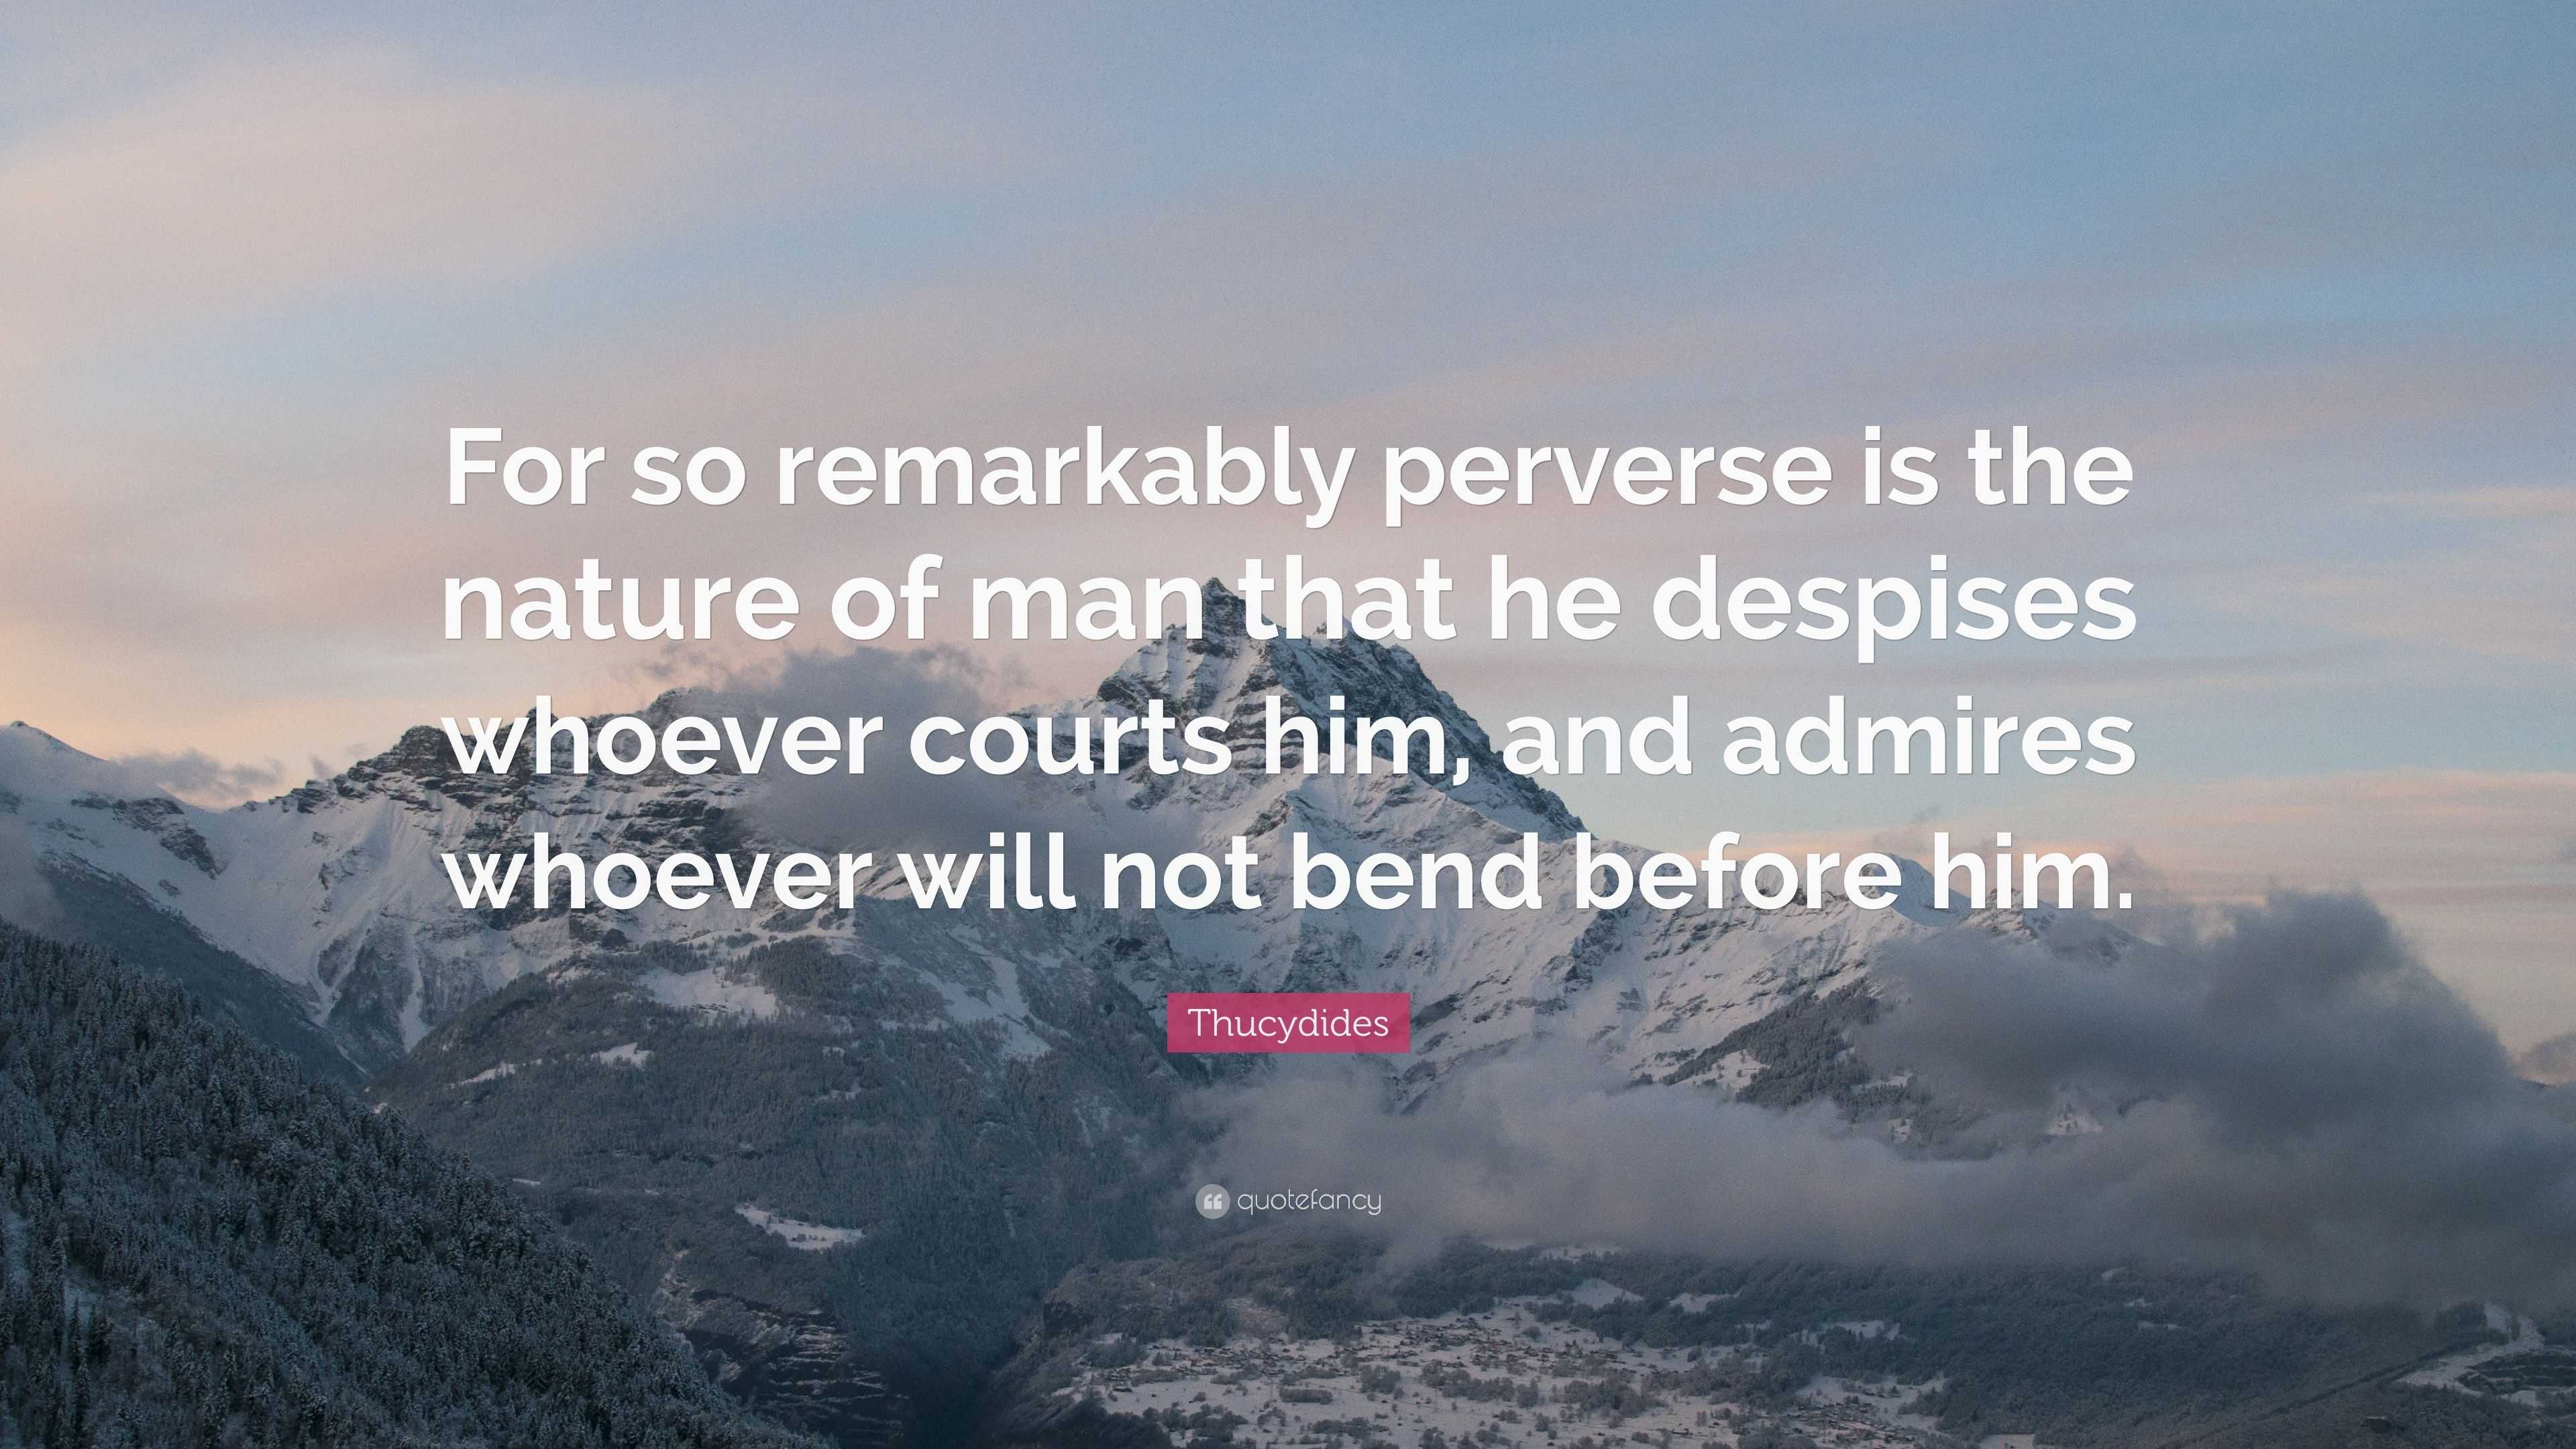 Thucydides Quote: “For so remarkably perverse is the of man that despises whoever courts and admires whoever will not bend b...”